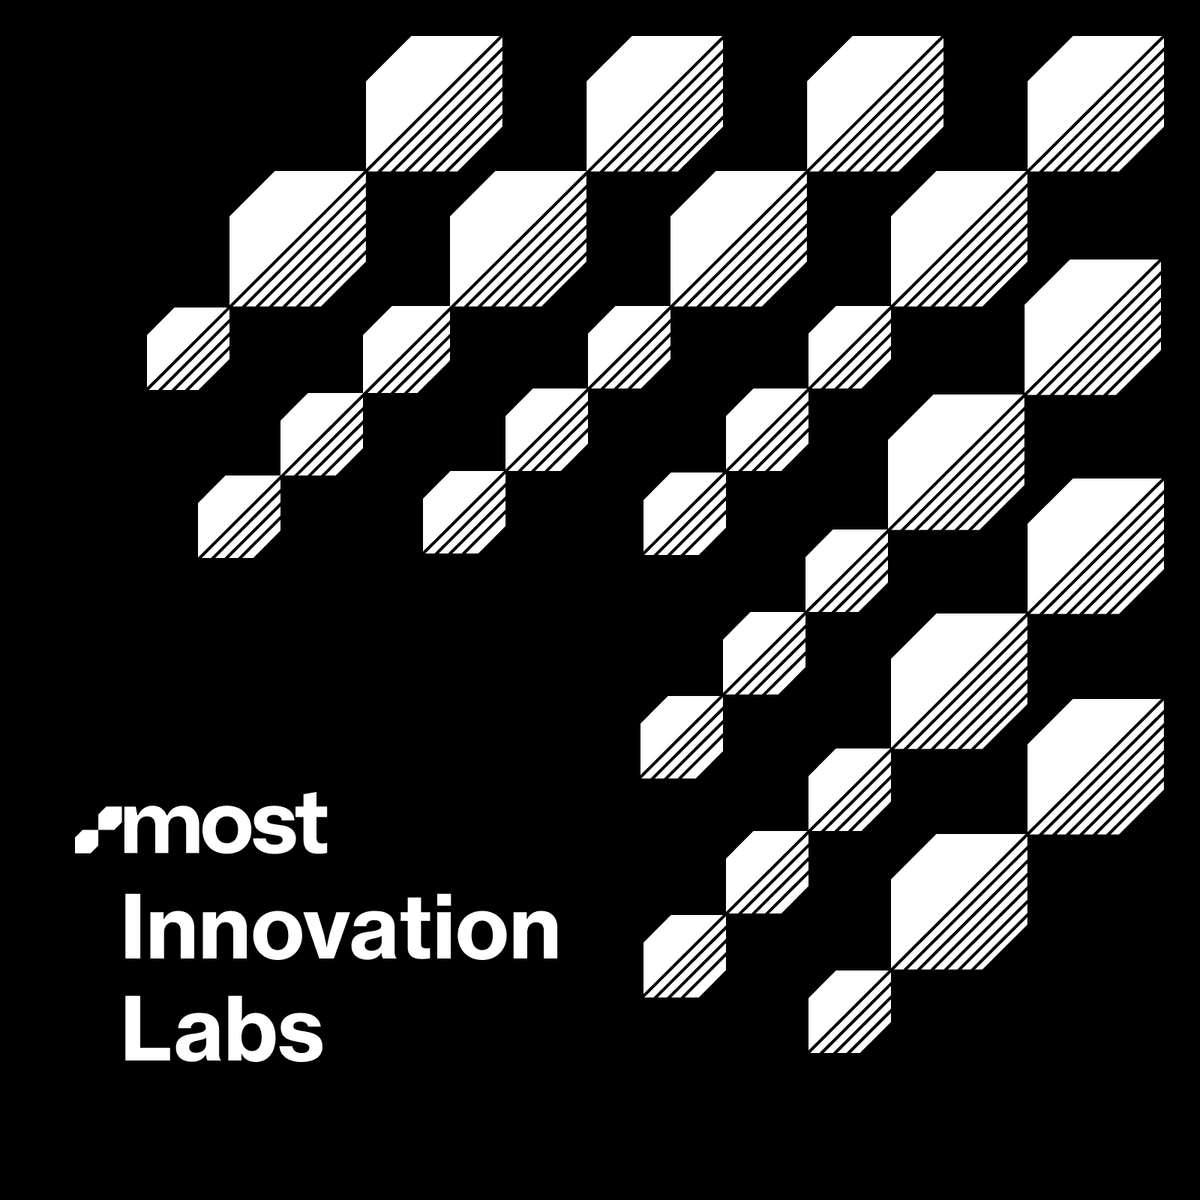 Introducing MOST Innovation Labs